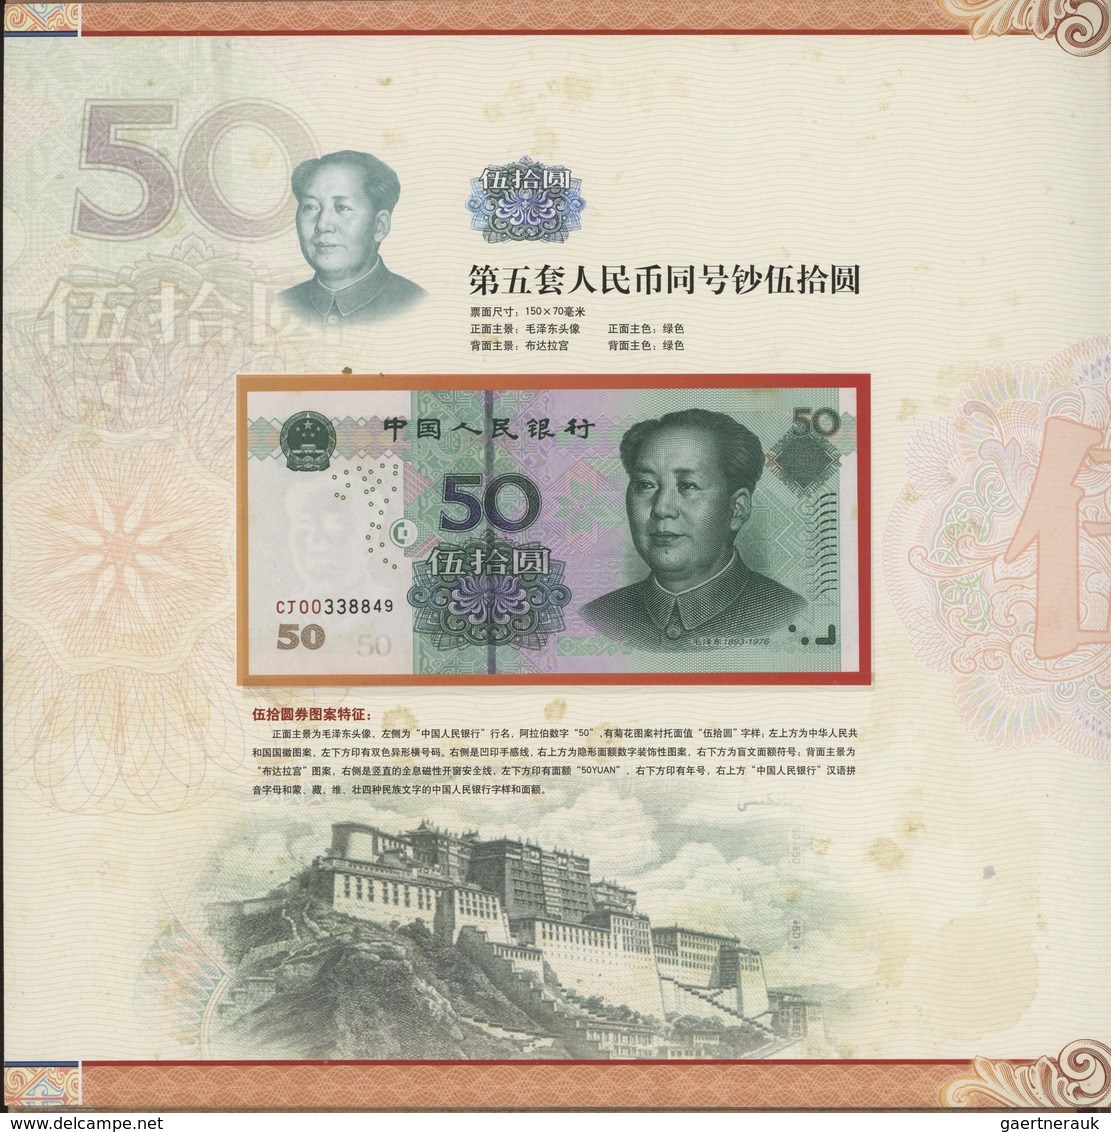 China: Collectors album issued by the Peoples Bank of China with new issued fith set of the RMB from